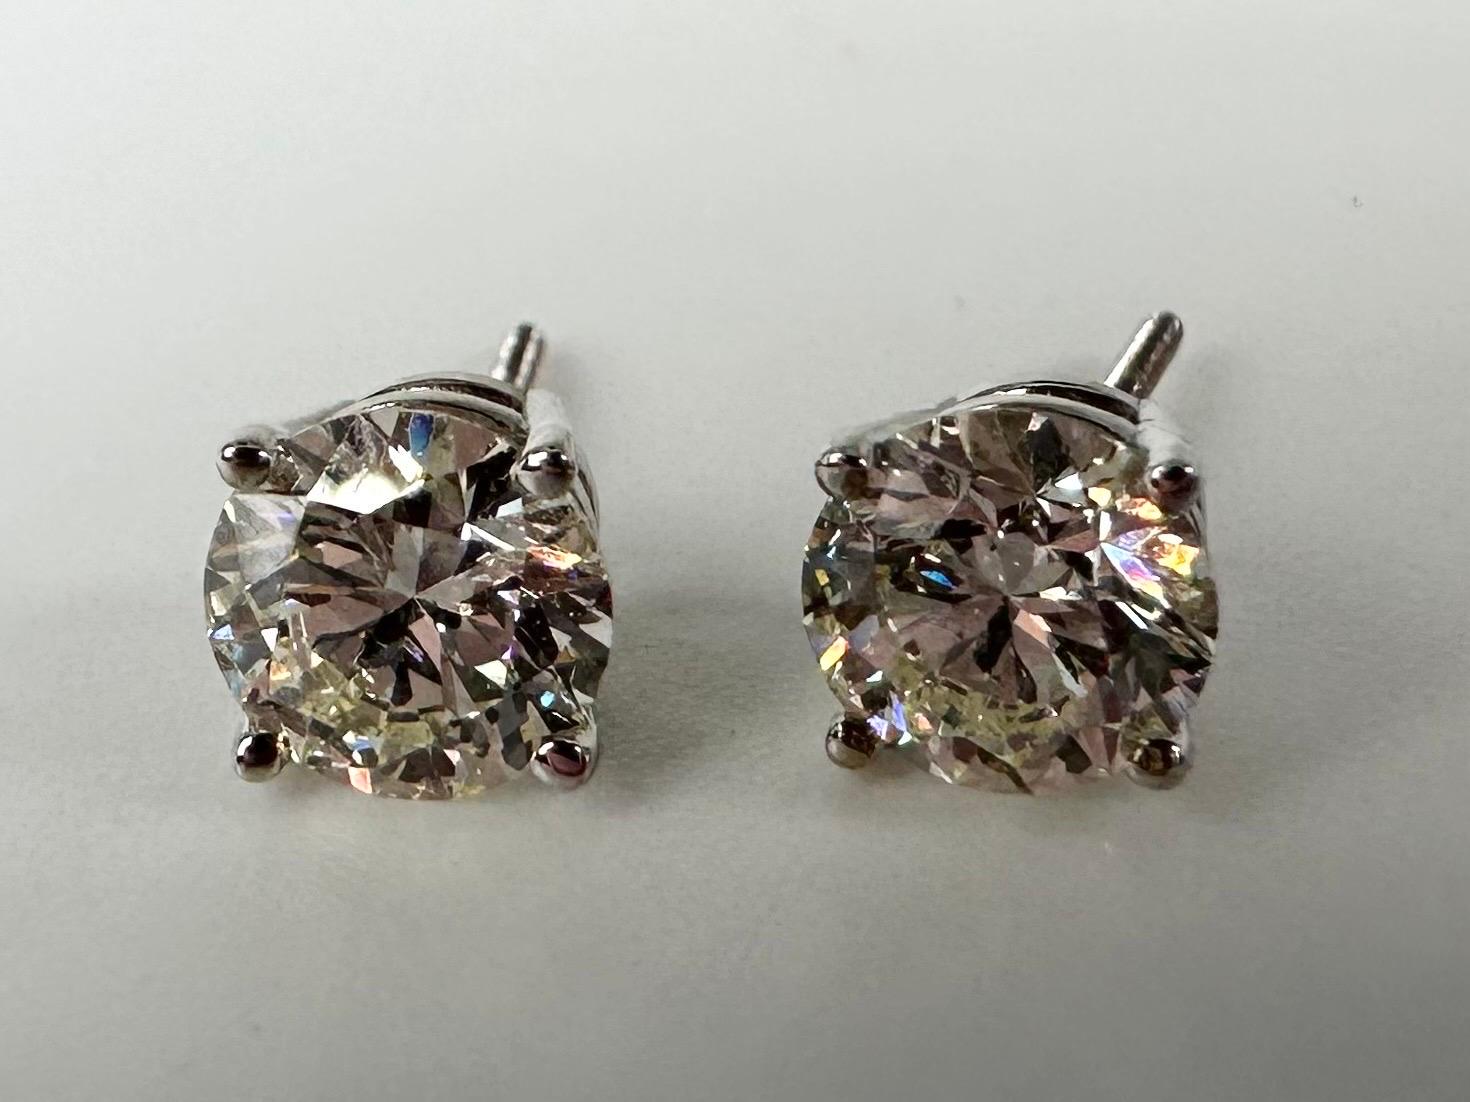 A pair of stunning diamond stud earrings in 14KT white gold.

GOLD: 14KT gold
NATURAL DIAMOND(S)
Clarity/Color: VS-SI/F
Carat:1.61ct 
Cut:Round Brilliant
Grams:5.70
Item: 15000038amfp

WHAT YOU GET AT STAMPAR JEWELERS:
Stampar Jewelers, located in